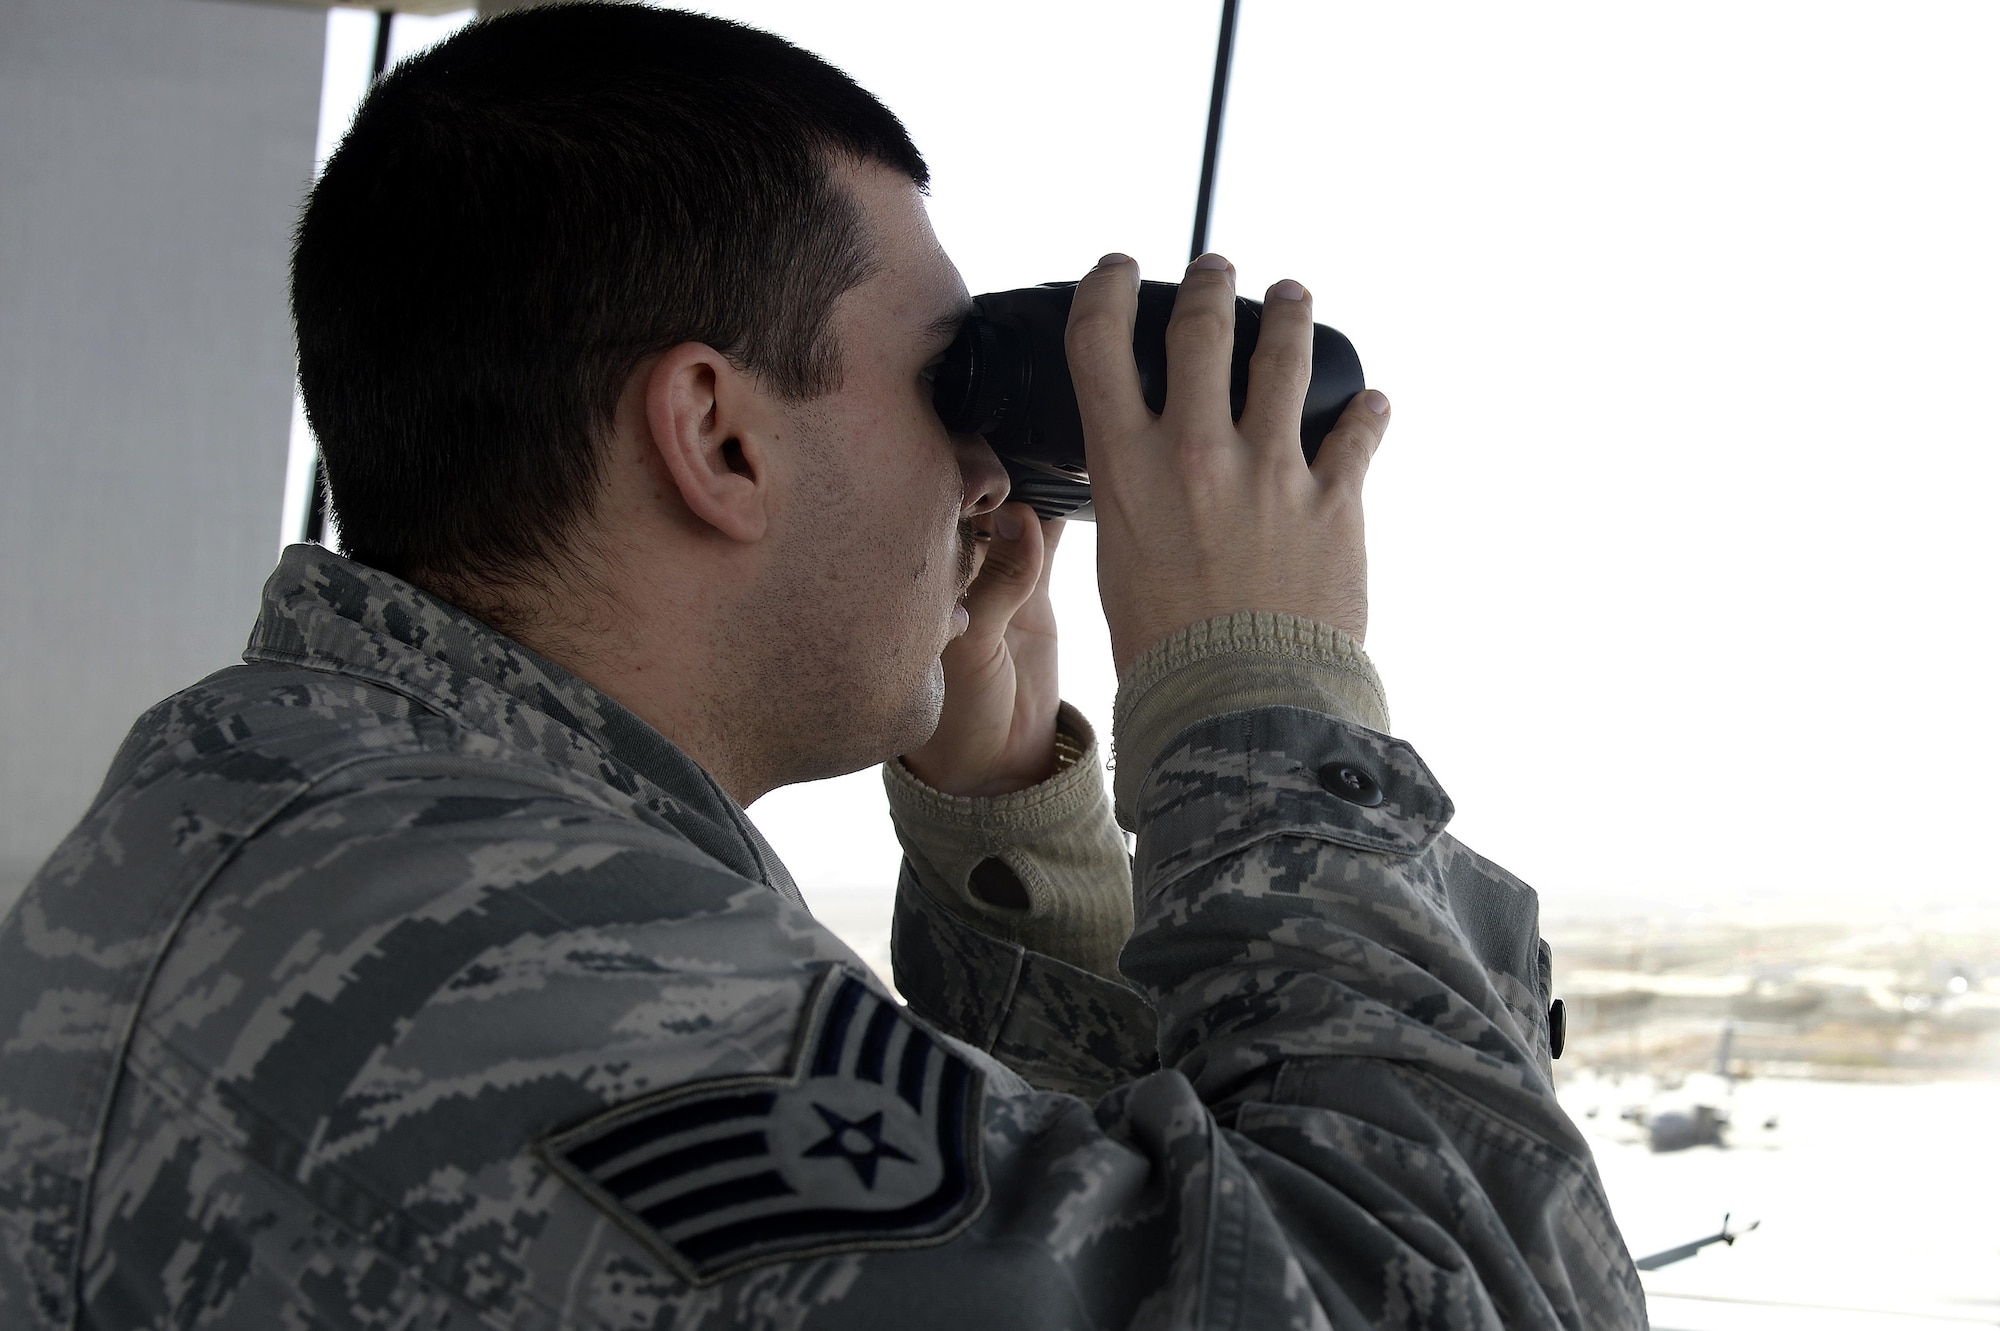 Staff Sgt. Matt, air traffic control liaison, scans the flightline from the air traffic control tower at an undisclosed location in Southwest Asia April 3, 2015. The duties of an air traffic controller liaison include making an automated terminal information service, which is a continuous broadcast of recorded weather and any other pertinent information for the pilots that they listen to before they go out. Matt is currently deployed from Tyndall Air Force Base, Fla. (U.S. Air Force photo/Tech. Sgt. Marie Brown/RELEASED)

